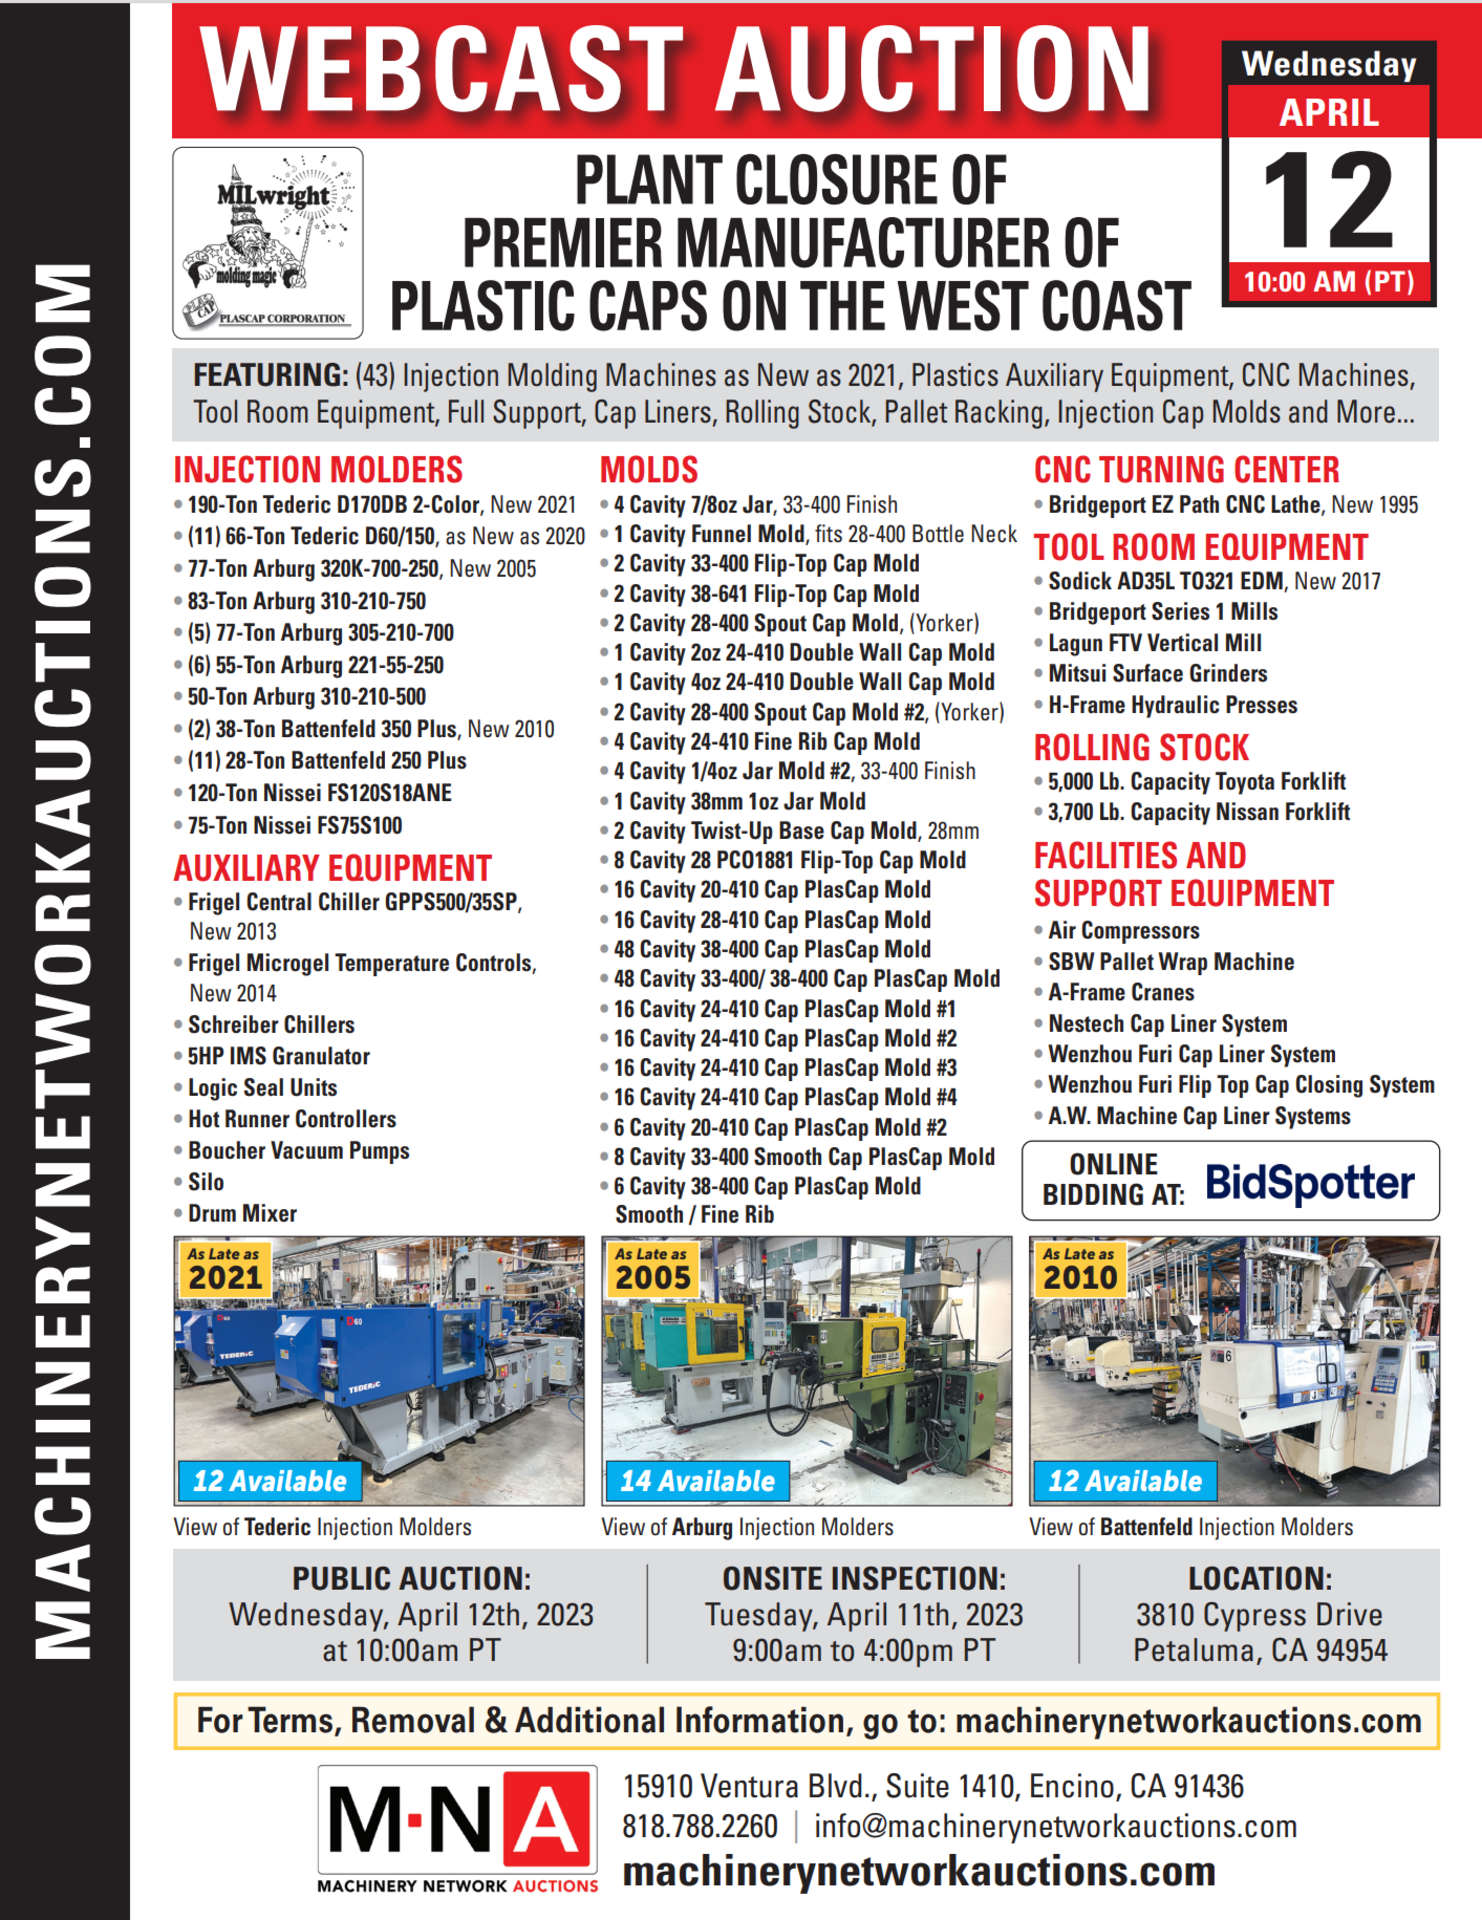 A PREMIER MANUFACTURER OF PLASTIC CAPS ON THE WEST COAST - Image 2 of 2